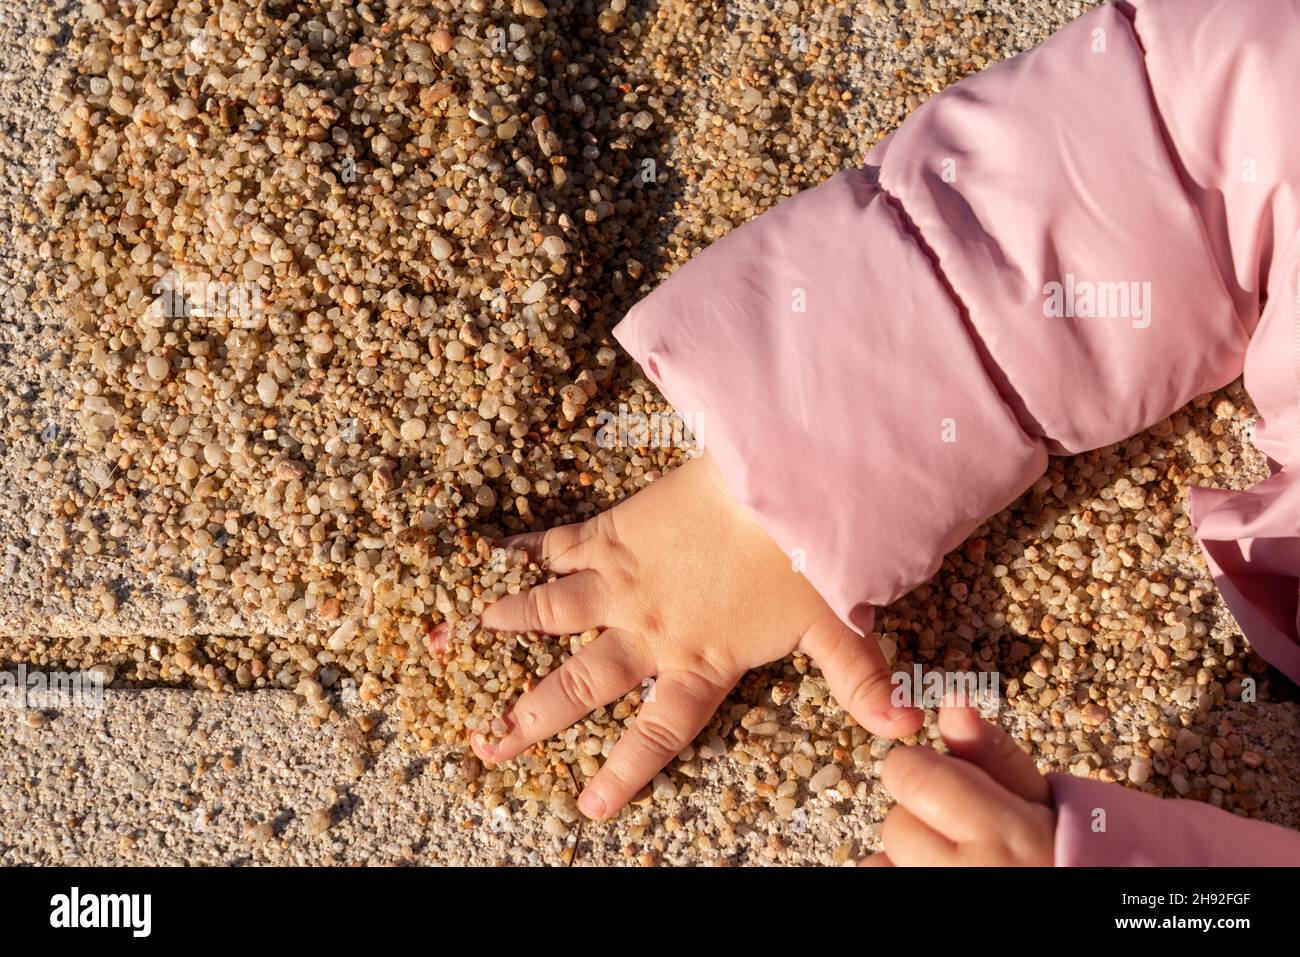 children's hand takes a handful of sand Stock Photo